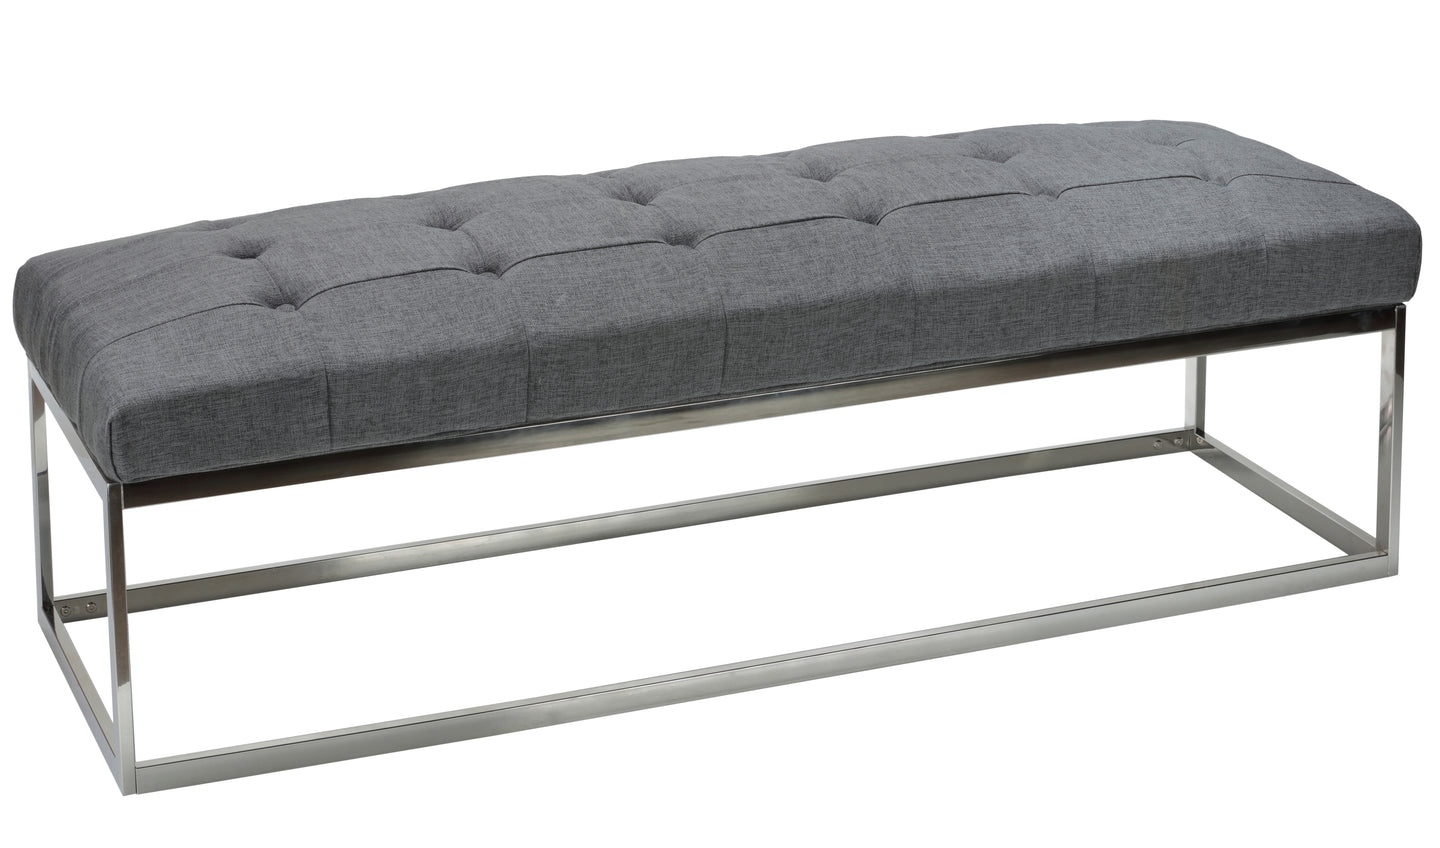 Cortesi Home Biago Contemporary Tufted Oversize Bench in Fabric, Grey Linen Fabric